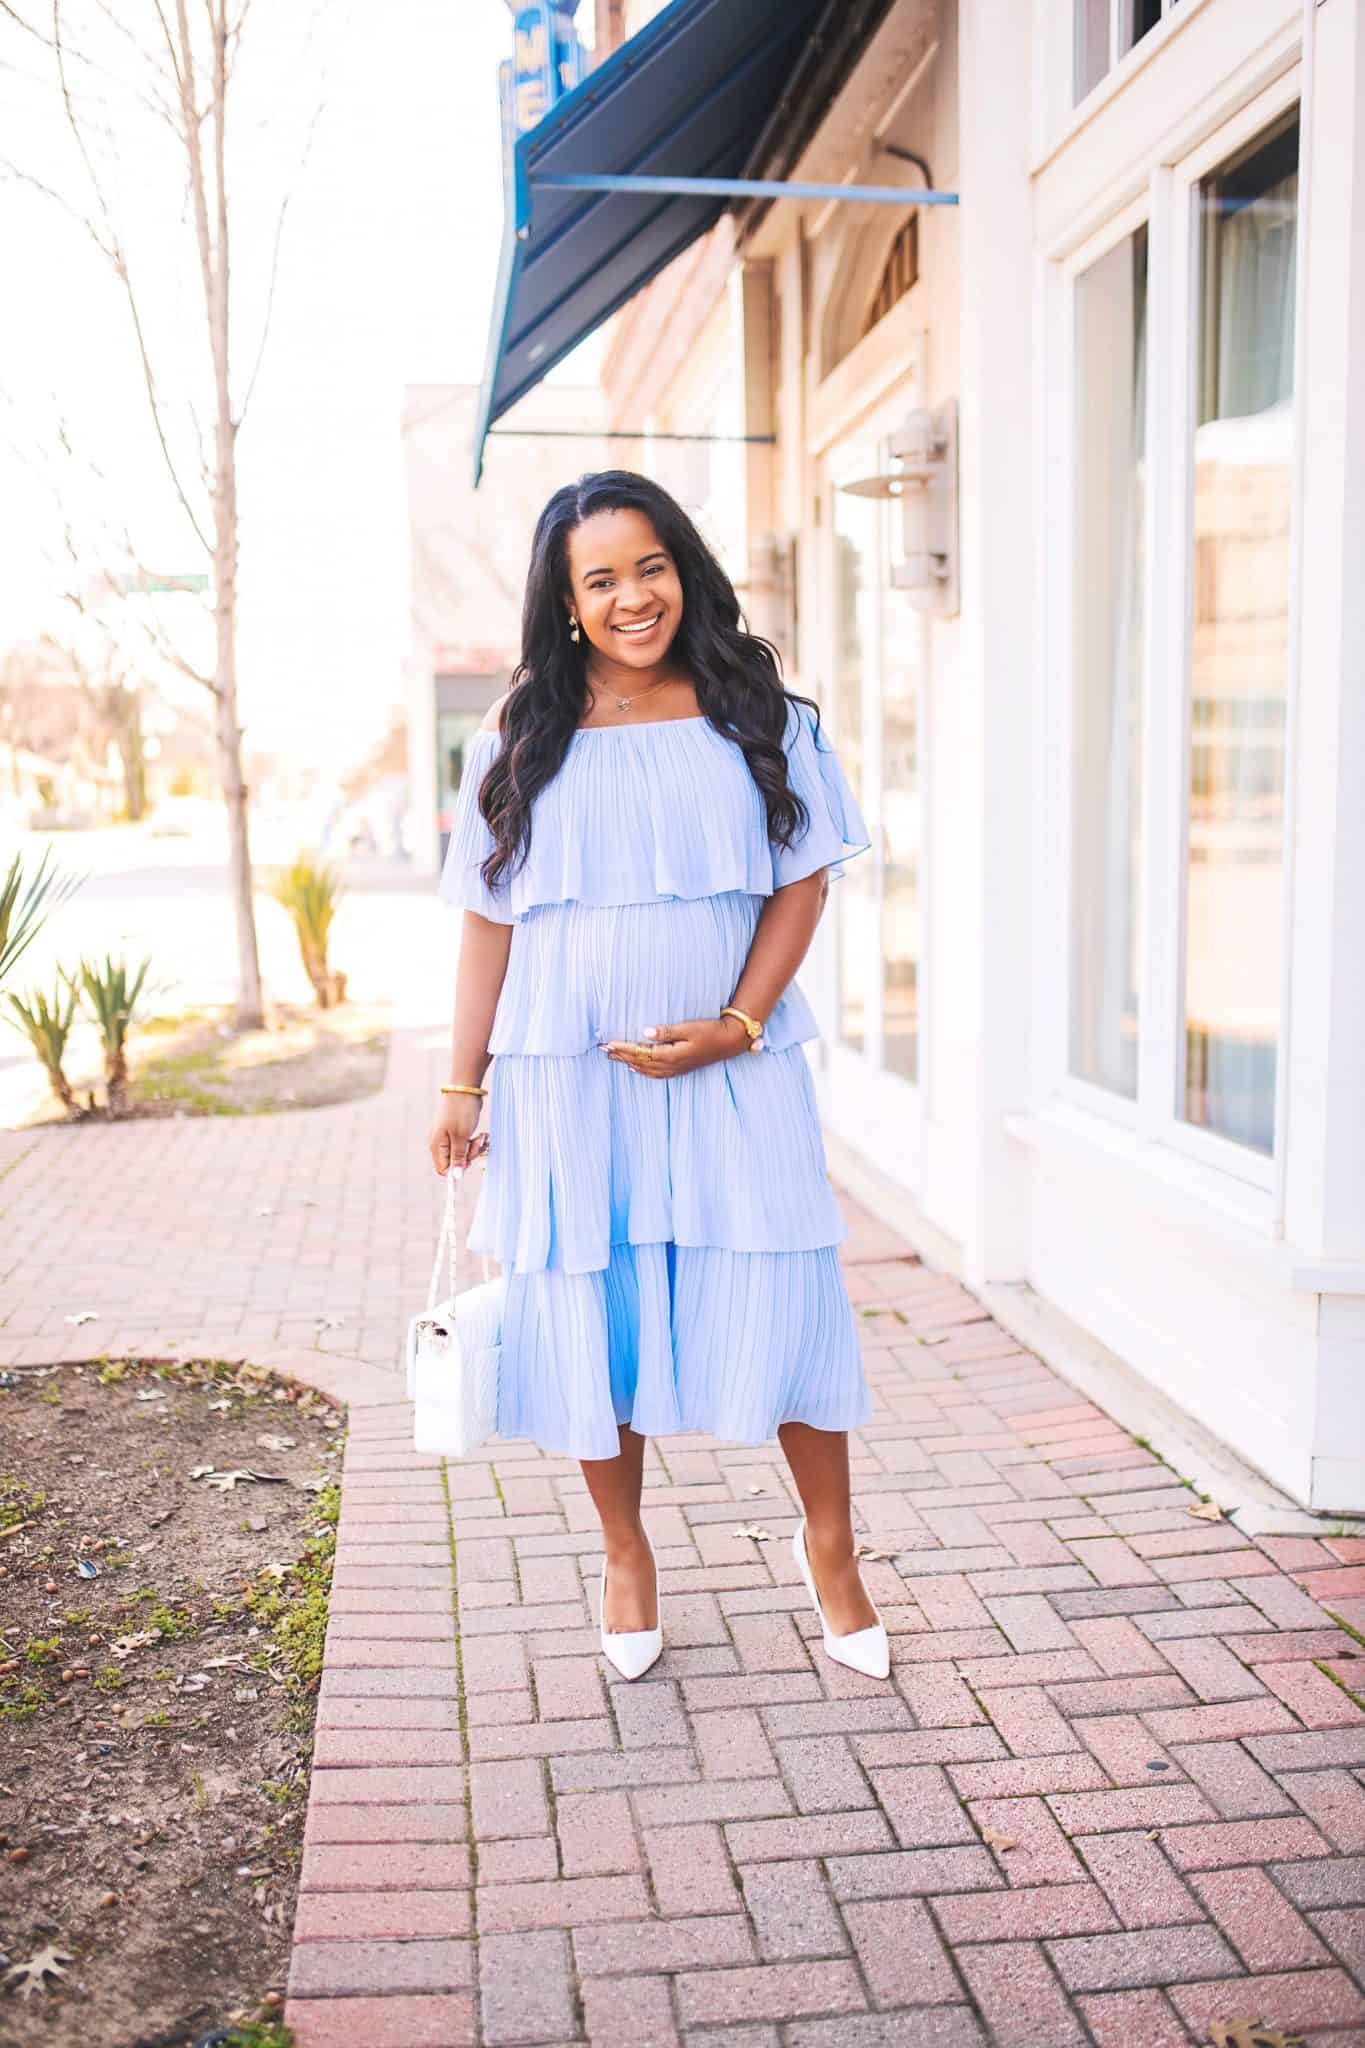 Baby Shower Dress Ideas by popular Dallas fashion blog, Glamorous Versatility: image of a woman wearing a blue tiered dress. 